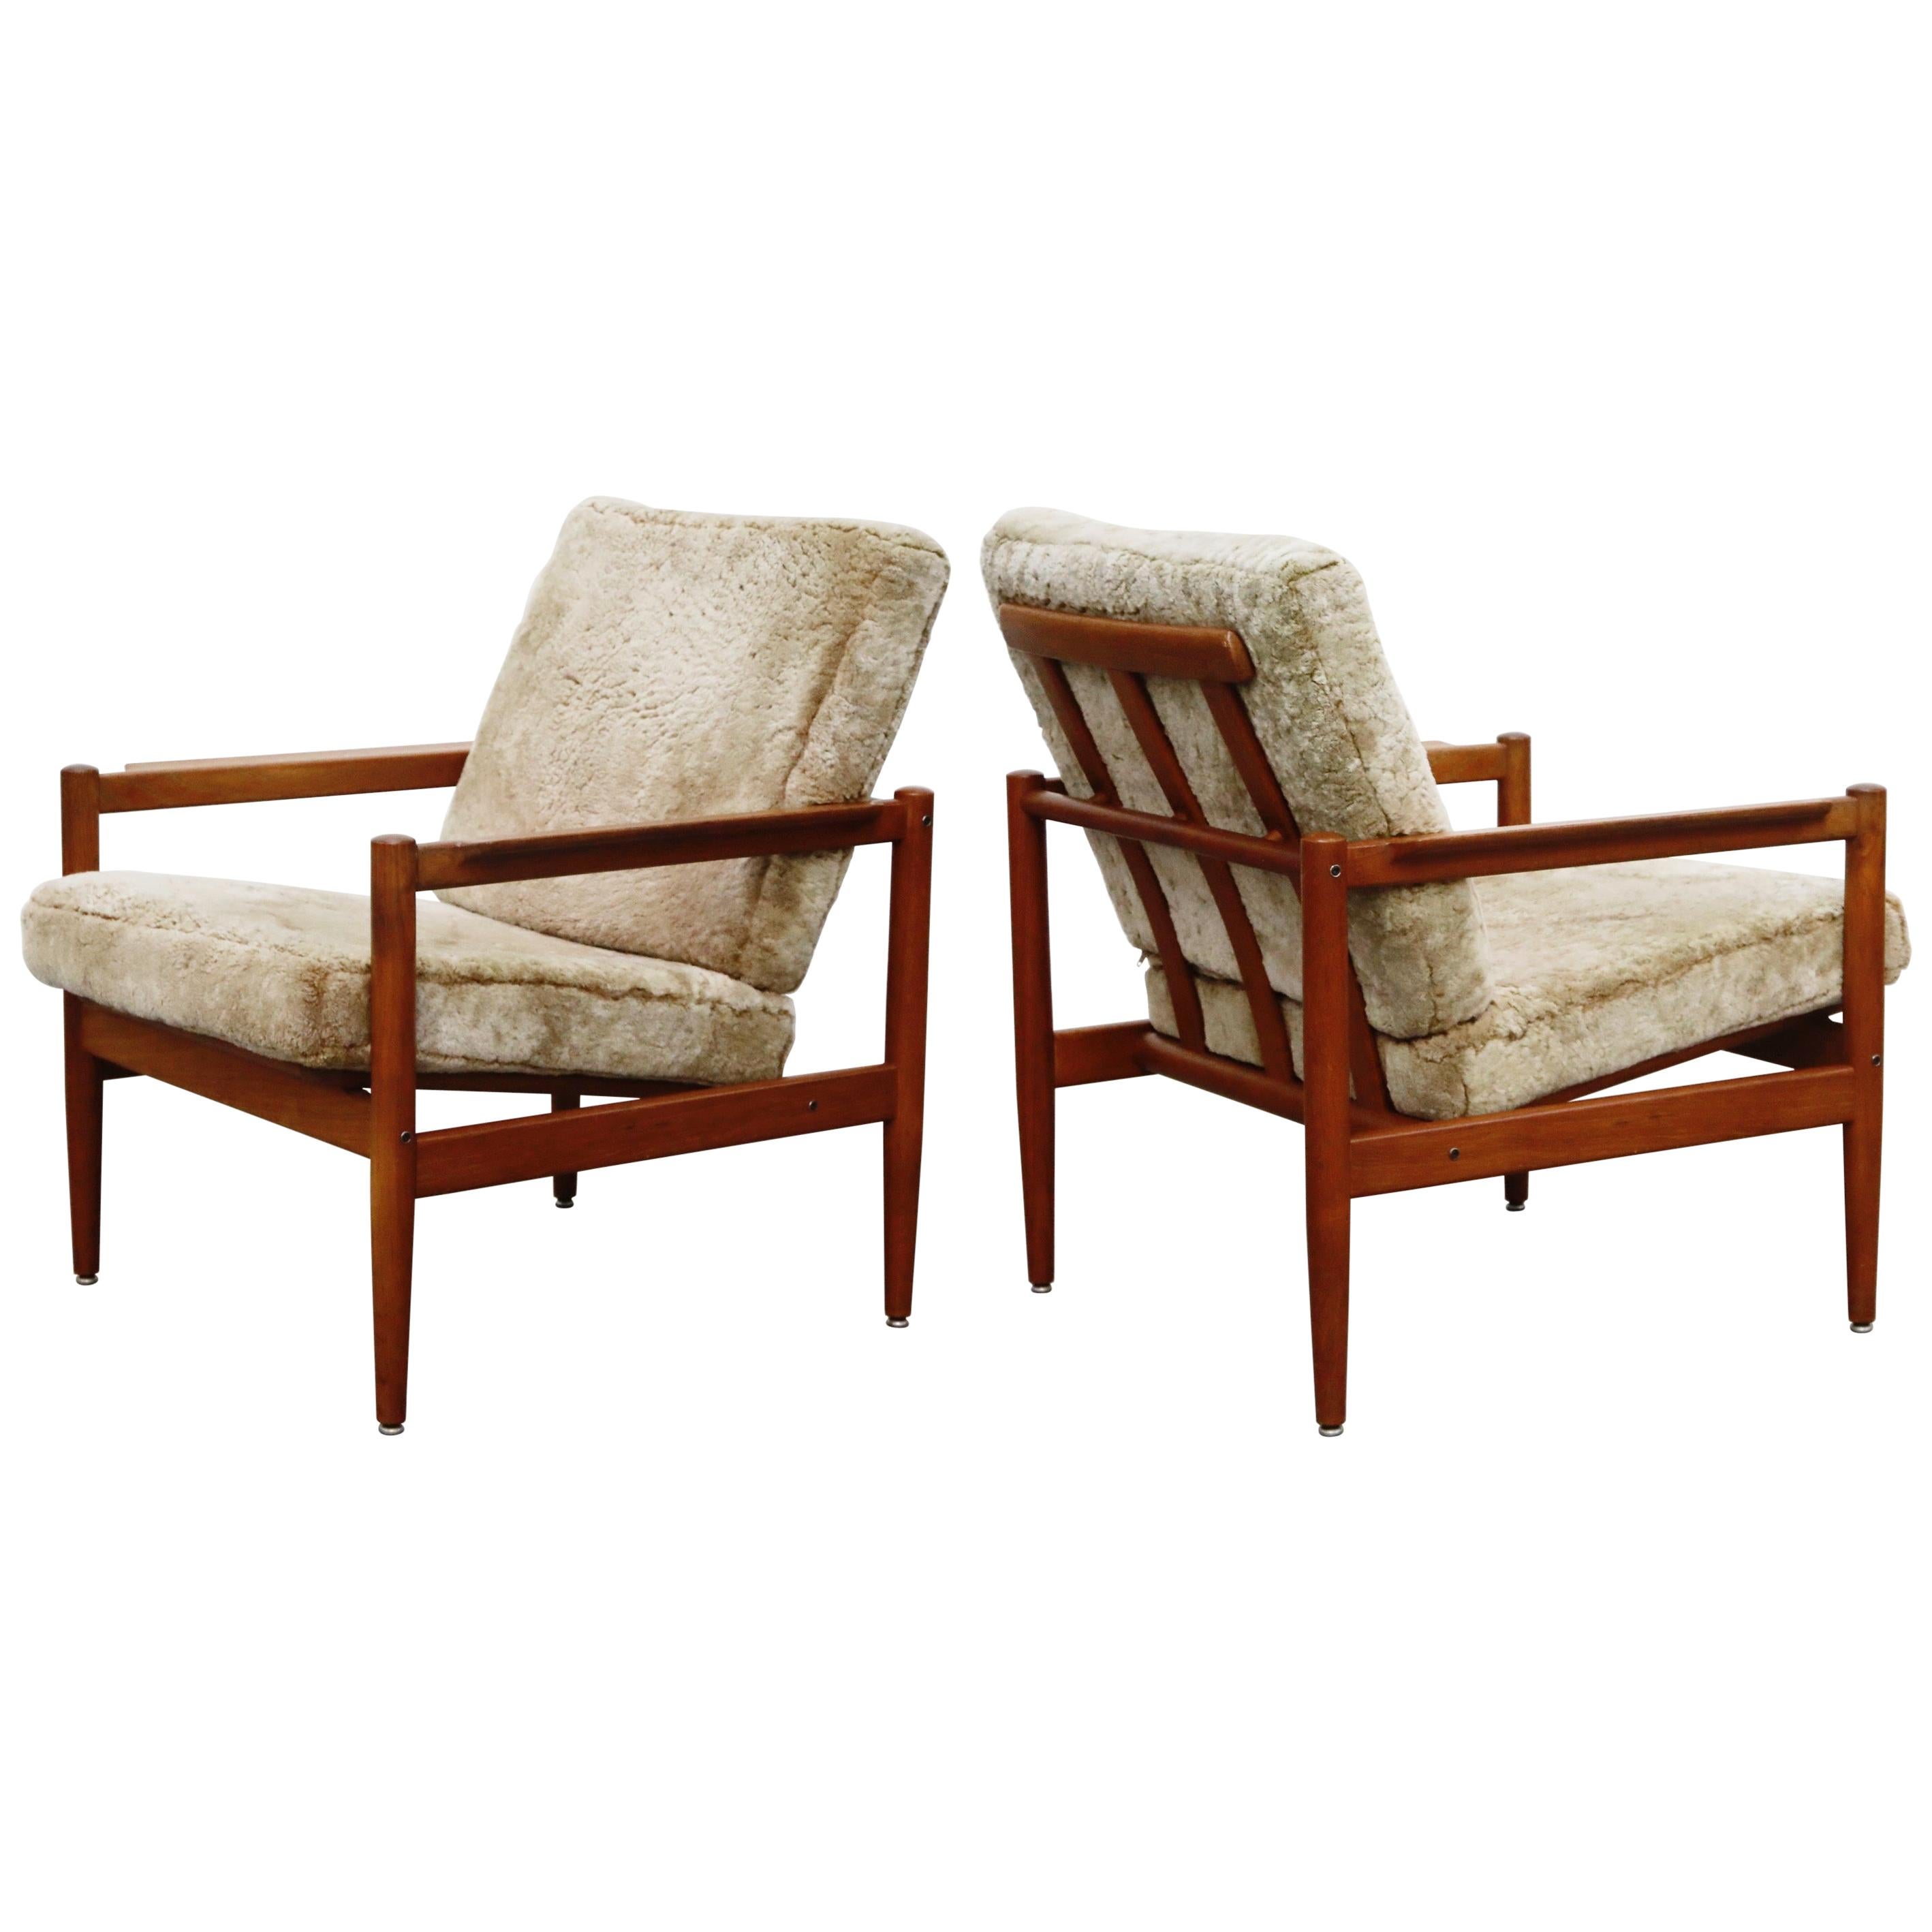 Teak and Shearling Fur Lounge Chairs by Børge Jensen & Sønner, 1960s, Signed